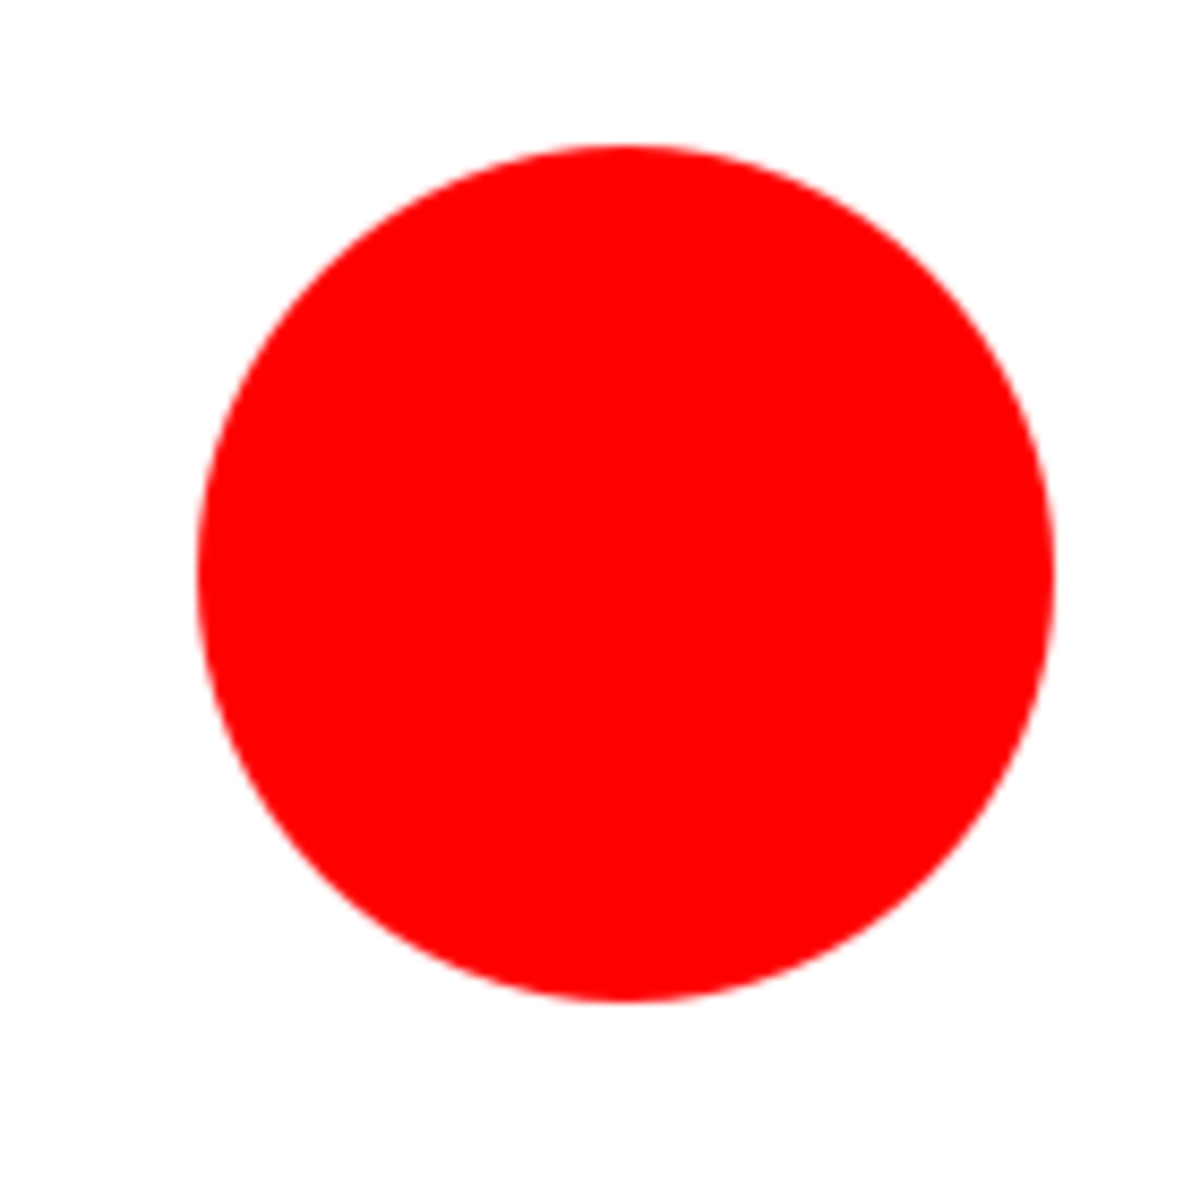 A red circle centered at coordinate (100, 100) with a radius of 50. 